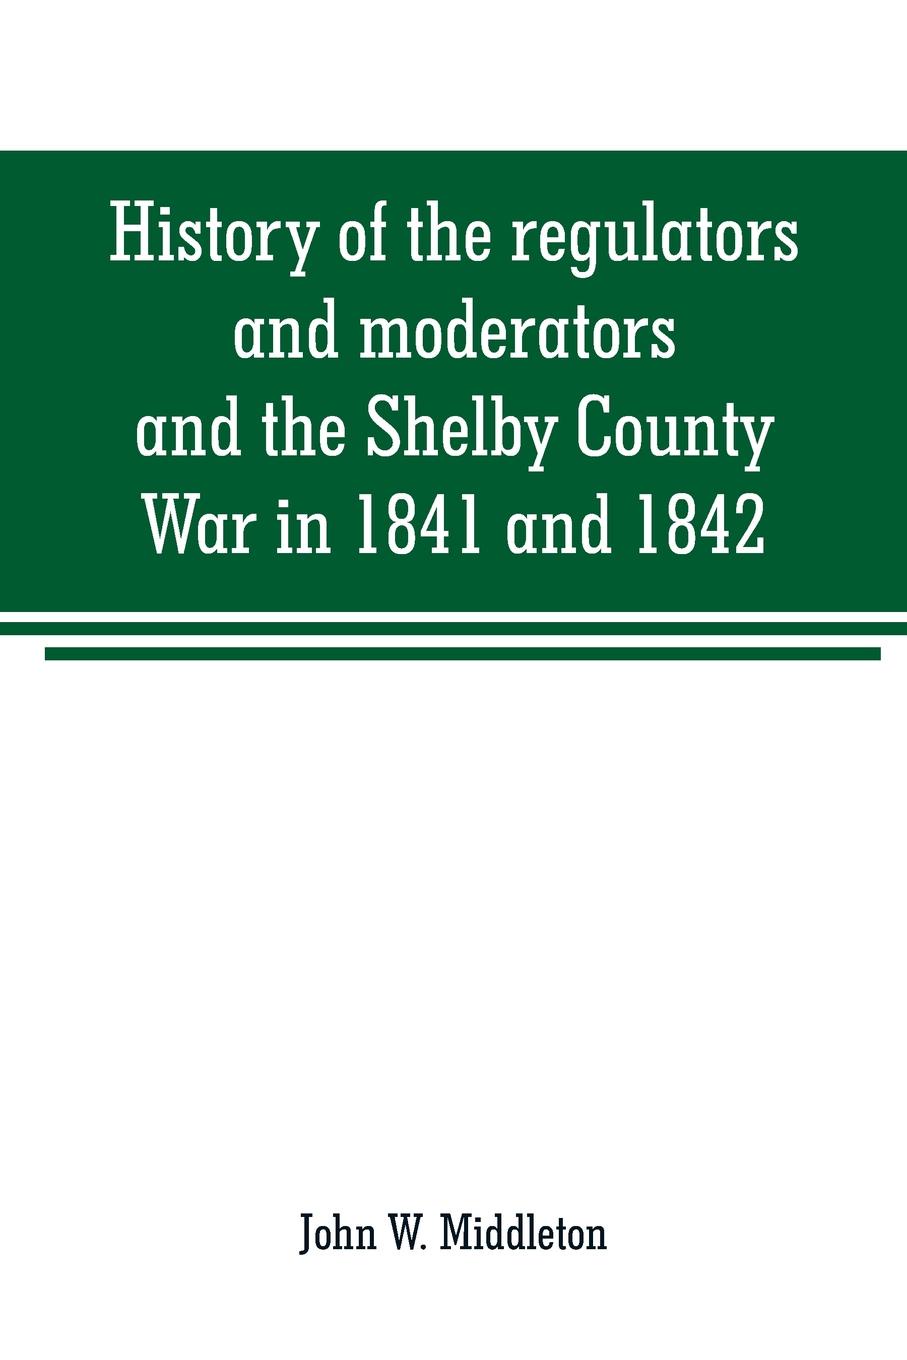 History of the regulators and moderators and the Shelby County War in 1841 and 1842, in the Republic of Texas. with facts and incidents in the early history of the republic and state, from 1837 to the annexation, together with incidents of frontie...